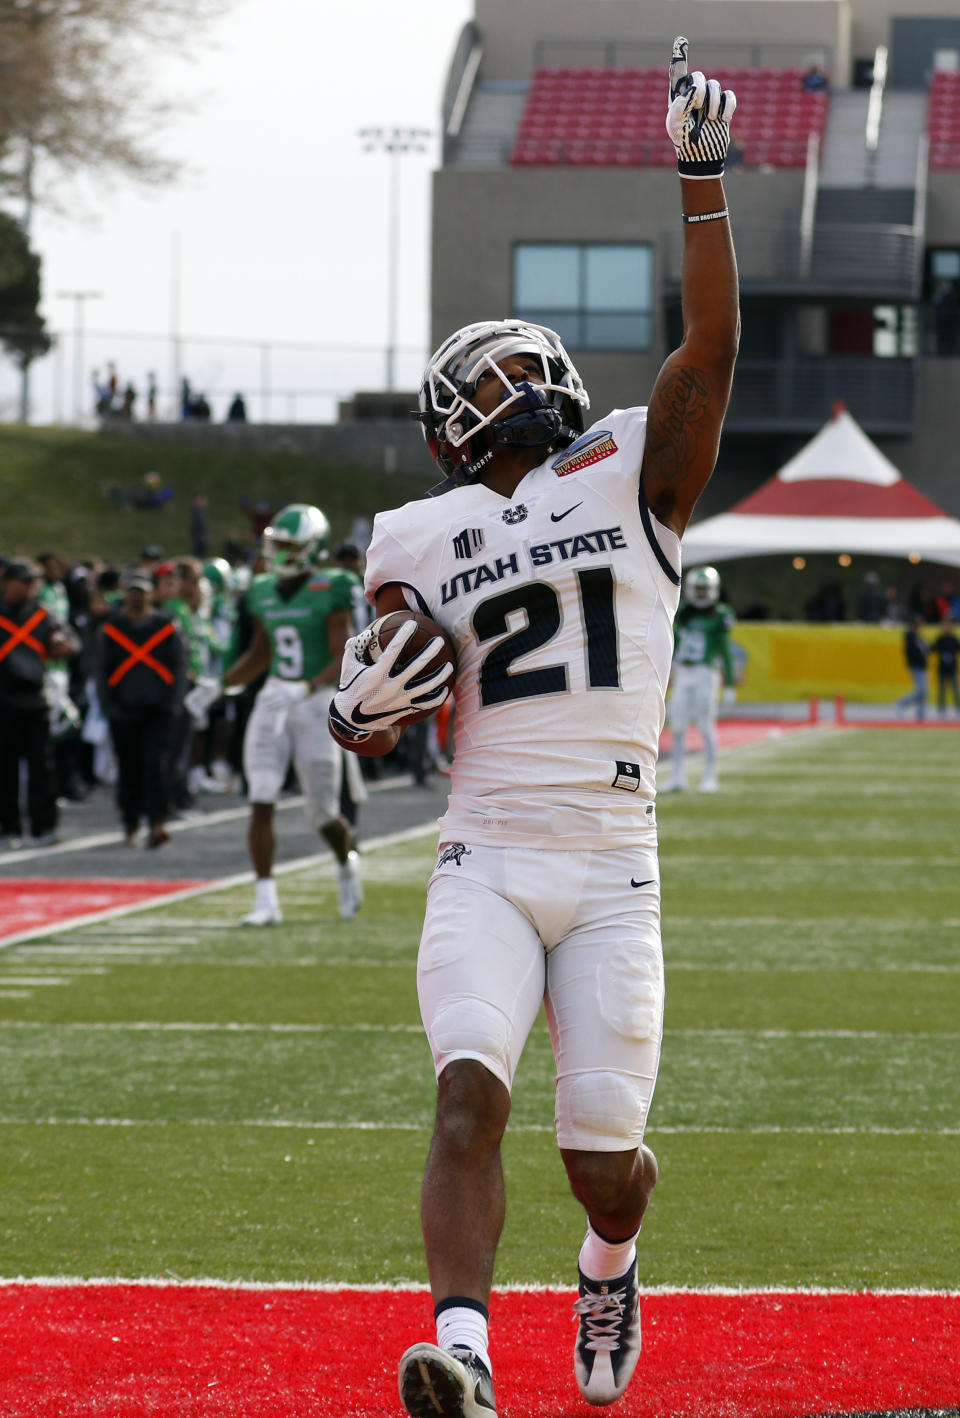 Utah State wide receiver Jalen Greene celebrates after scoring a touchdown against North Texas during the first half of the New Mexico Bowl NCAA college football game in Albuquerque, N.M., Saturday, Dec. 15, 2018. (AP Photo/Andres Leighton)